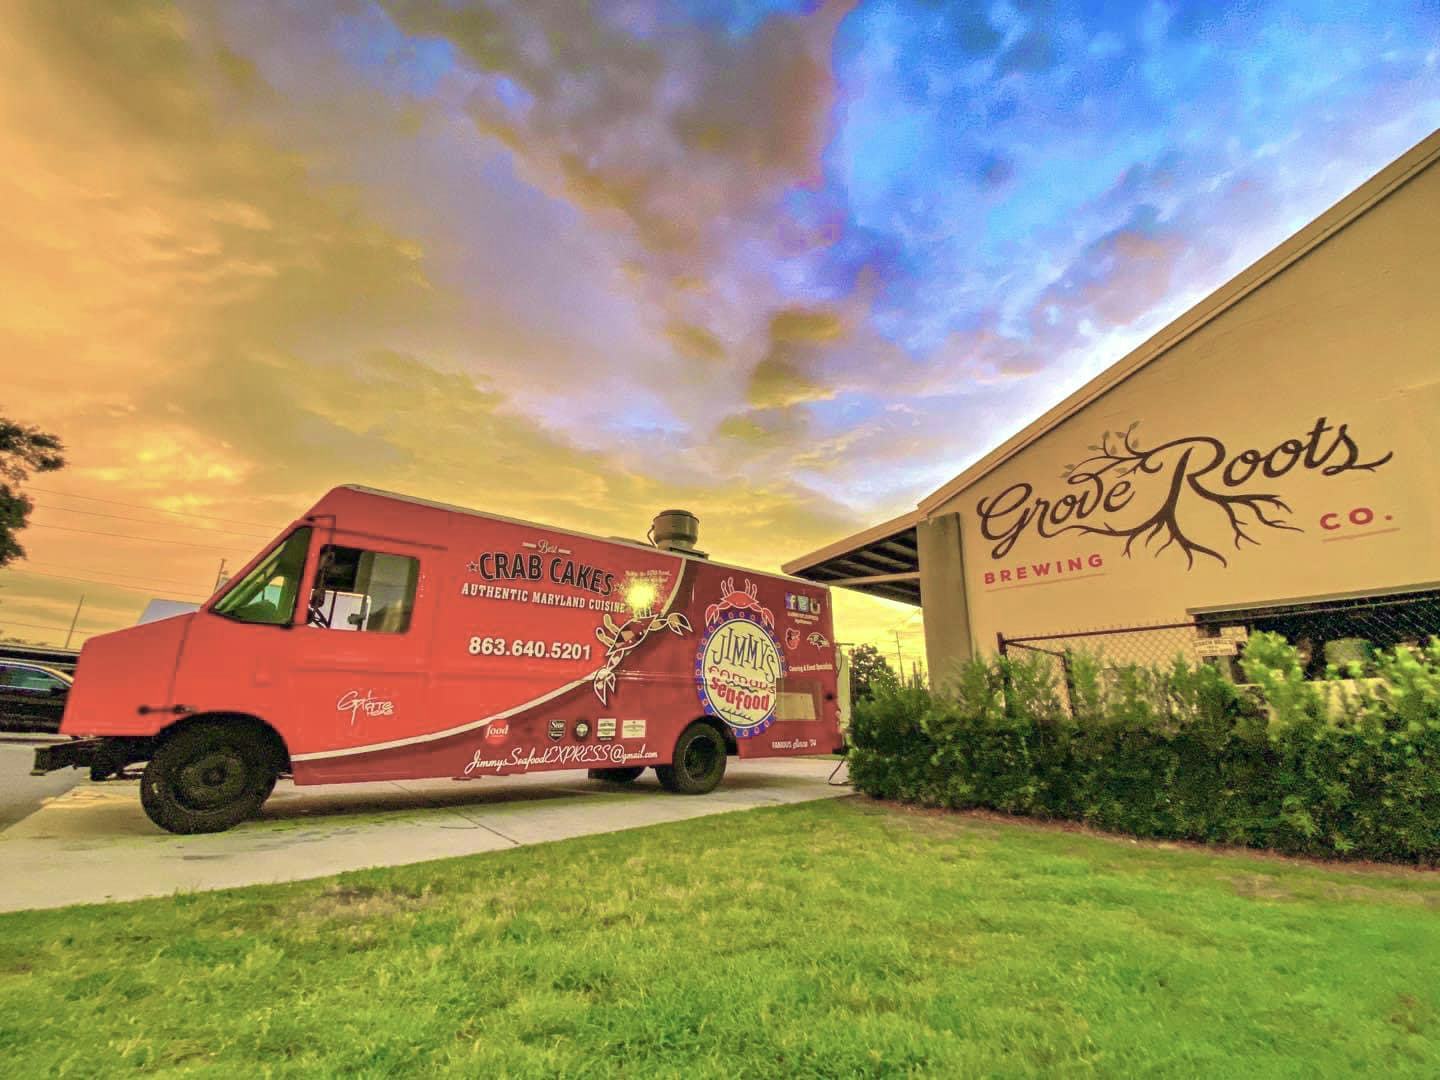 Jimmy’s Famous Seafood food truck at Grove Roots Brewing in Winter Haven